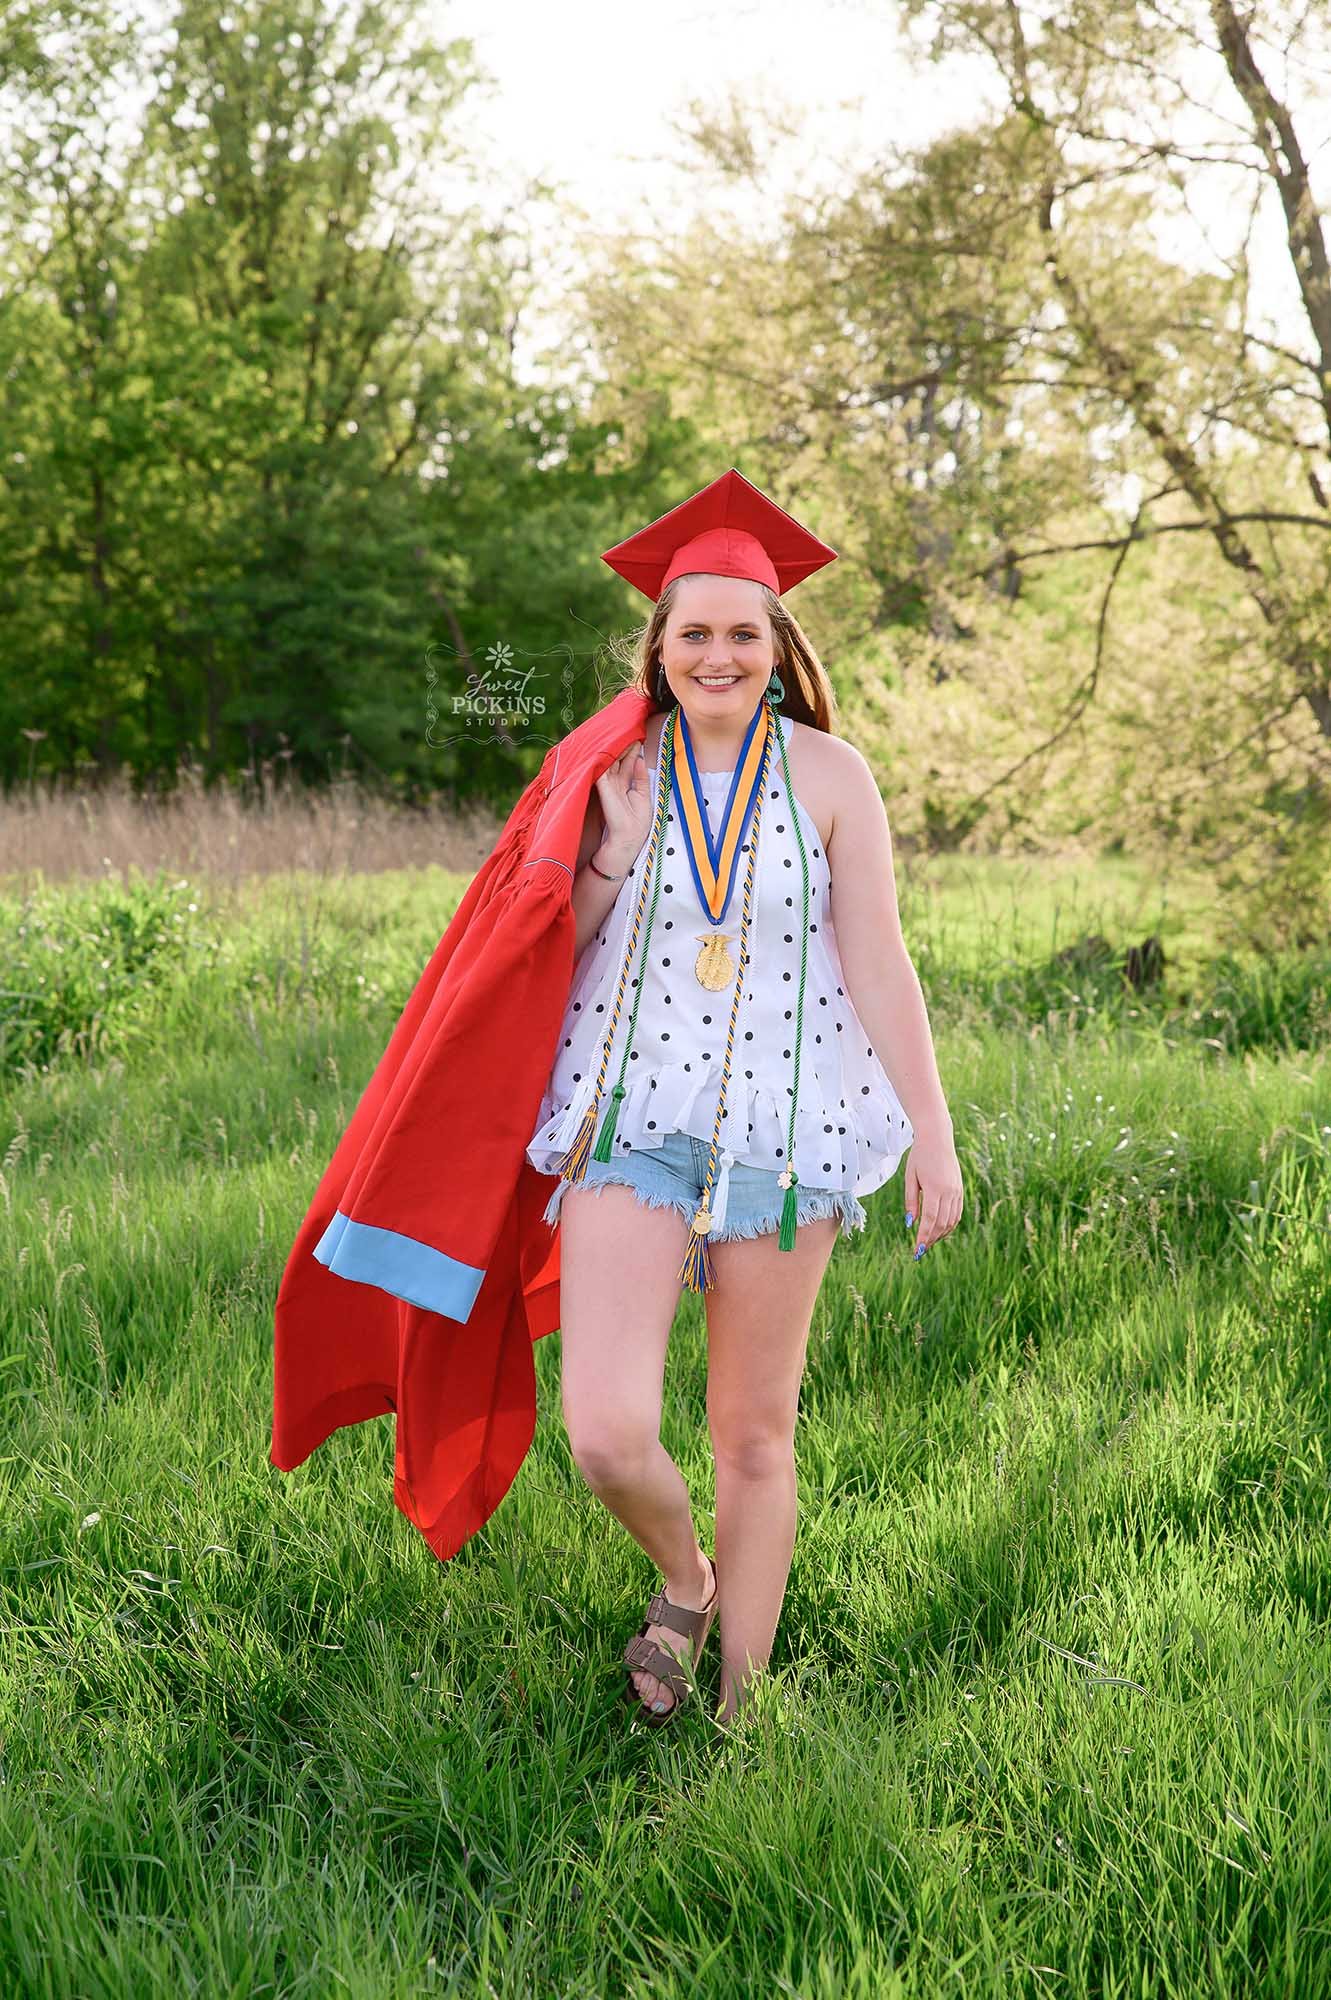 Peru, Indiana Cap &amp; Gown Photography for Graduation